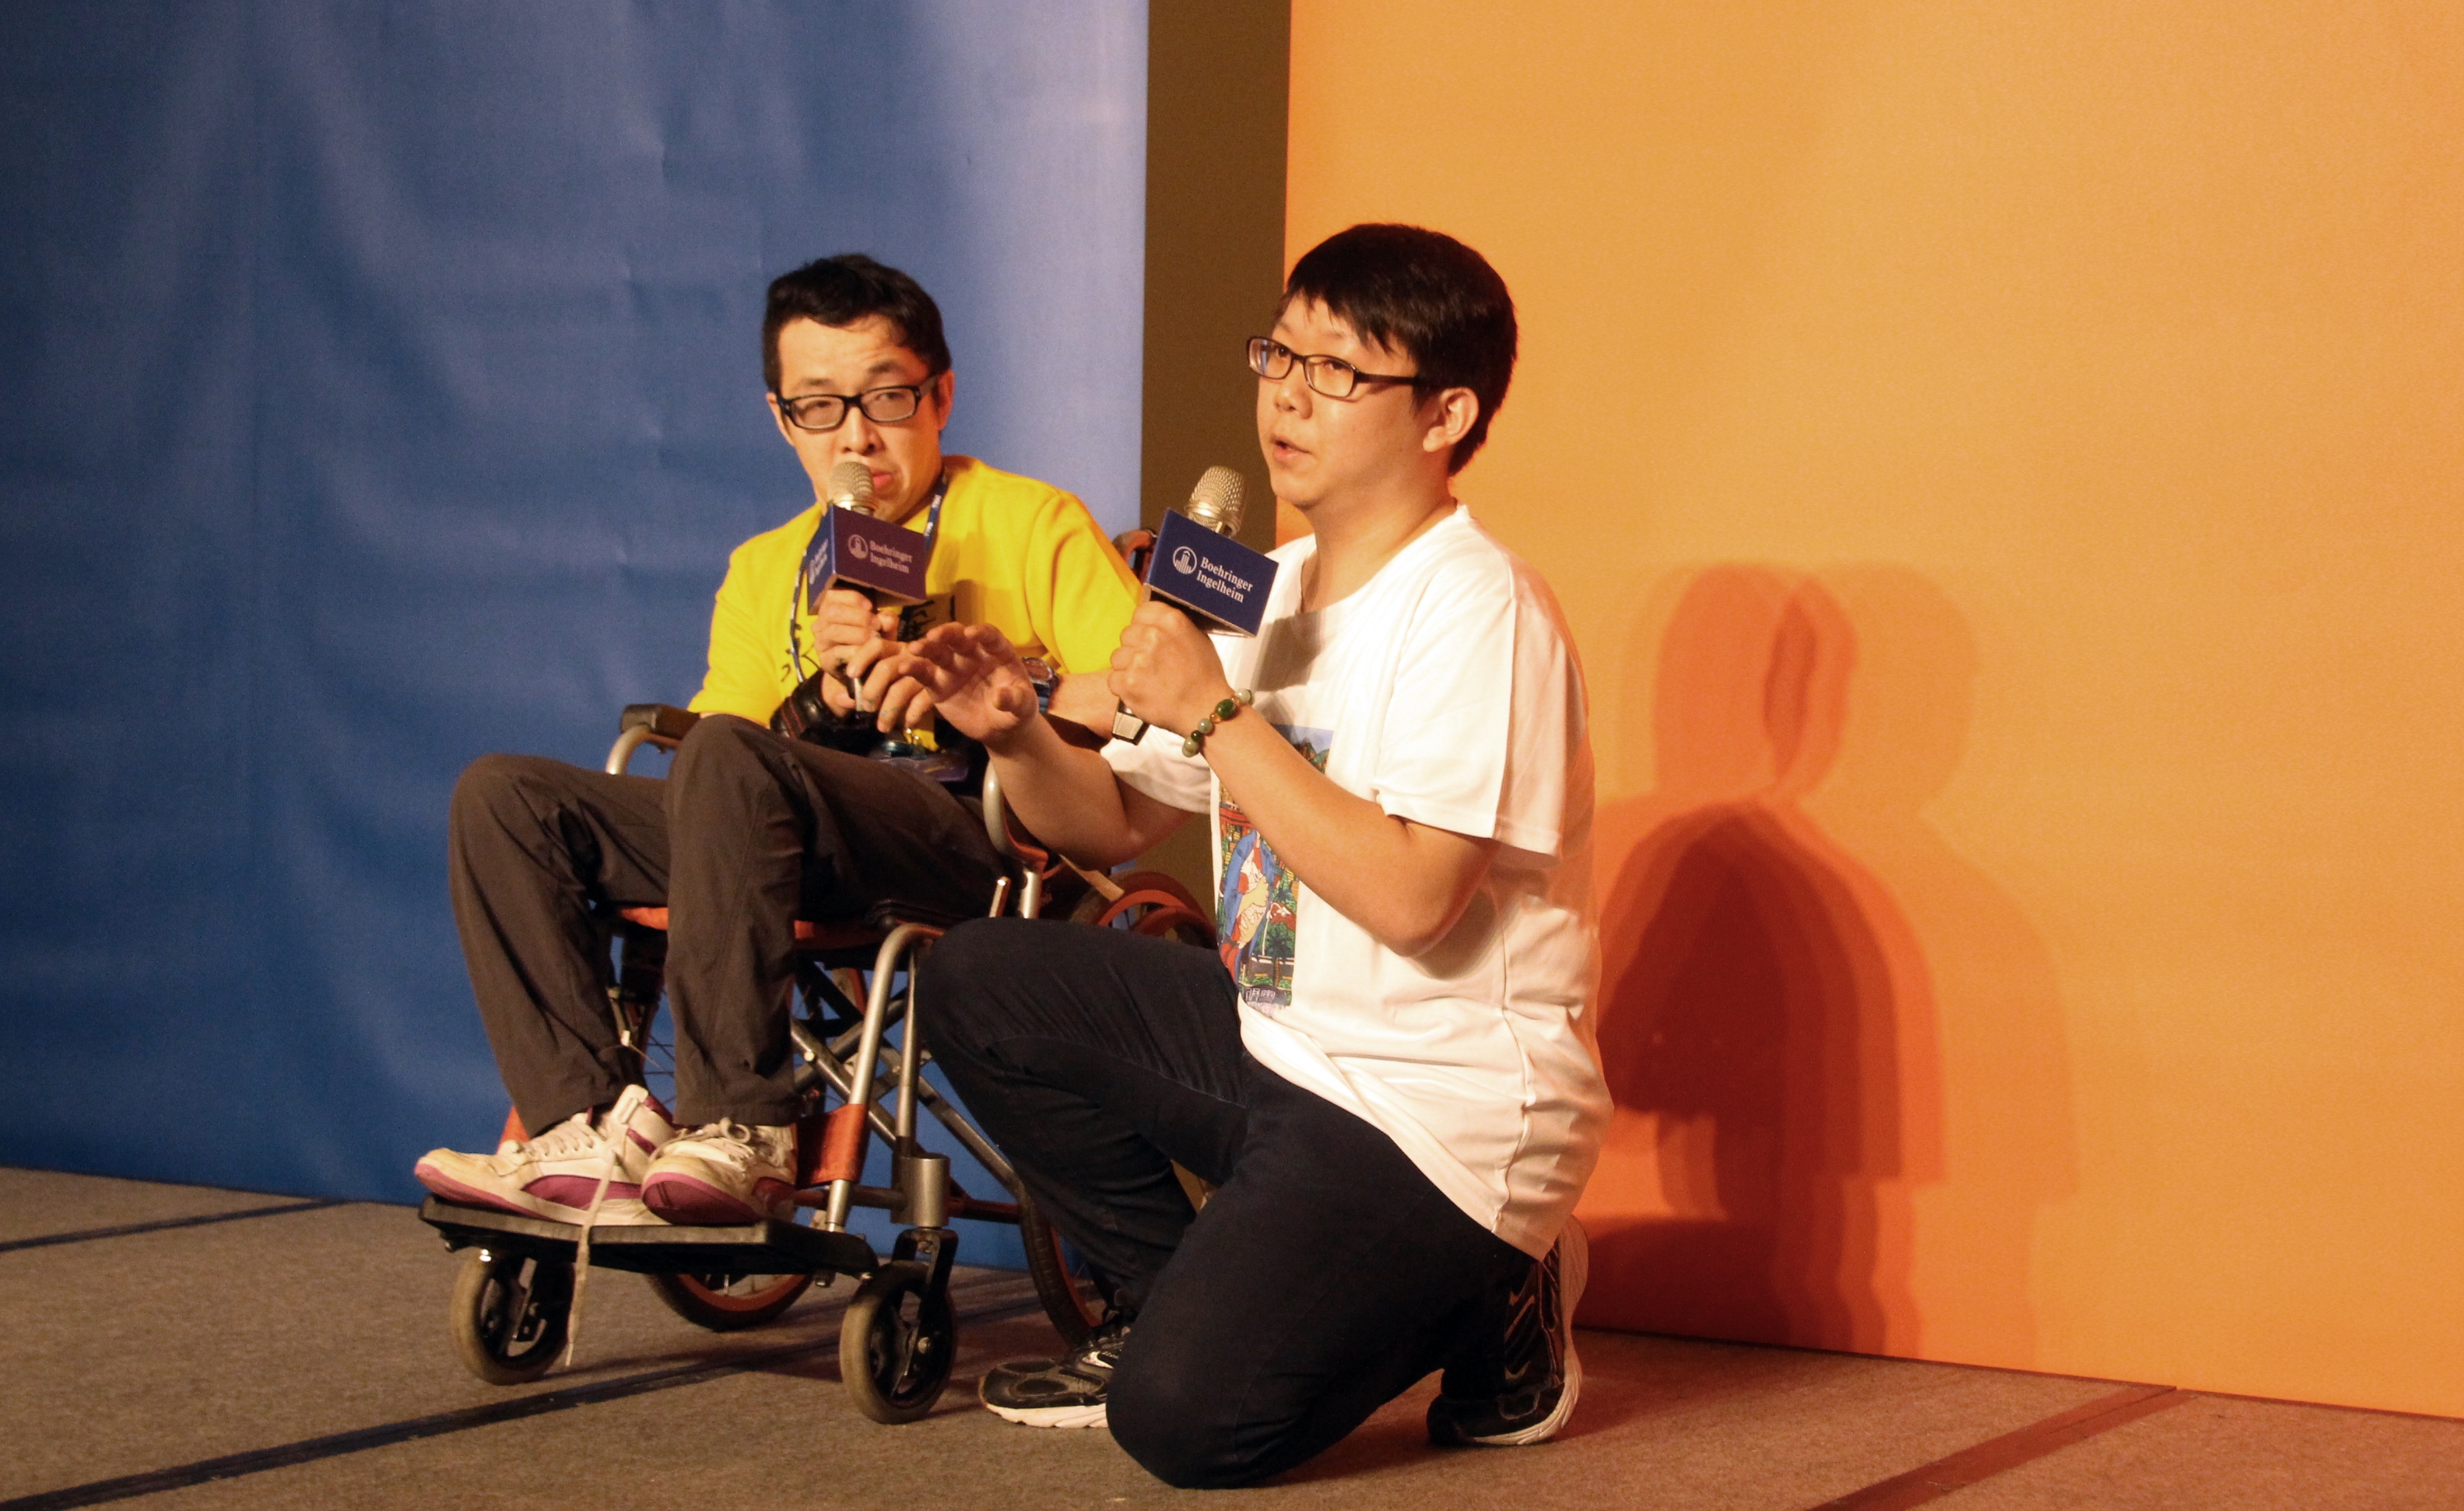 Disability Artist Duan-Zheng (left) happily sharing his thoughts on the event and his experience creating art